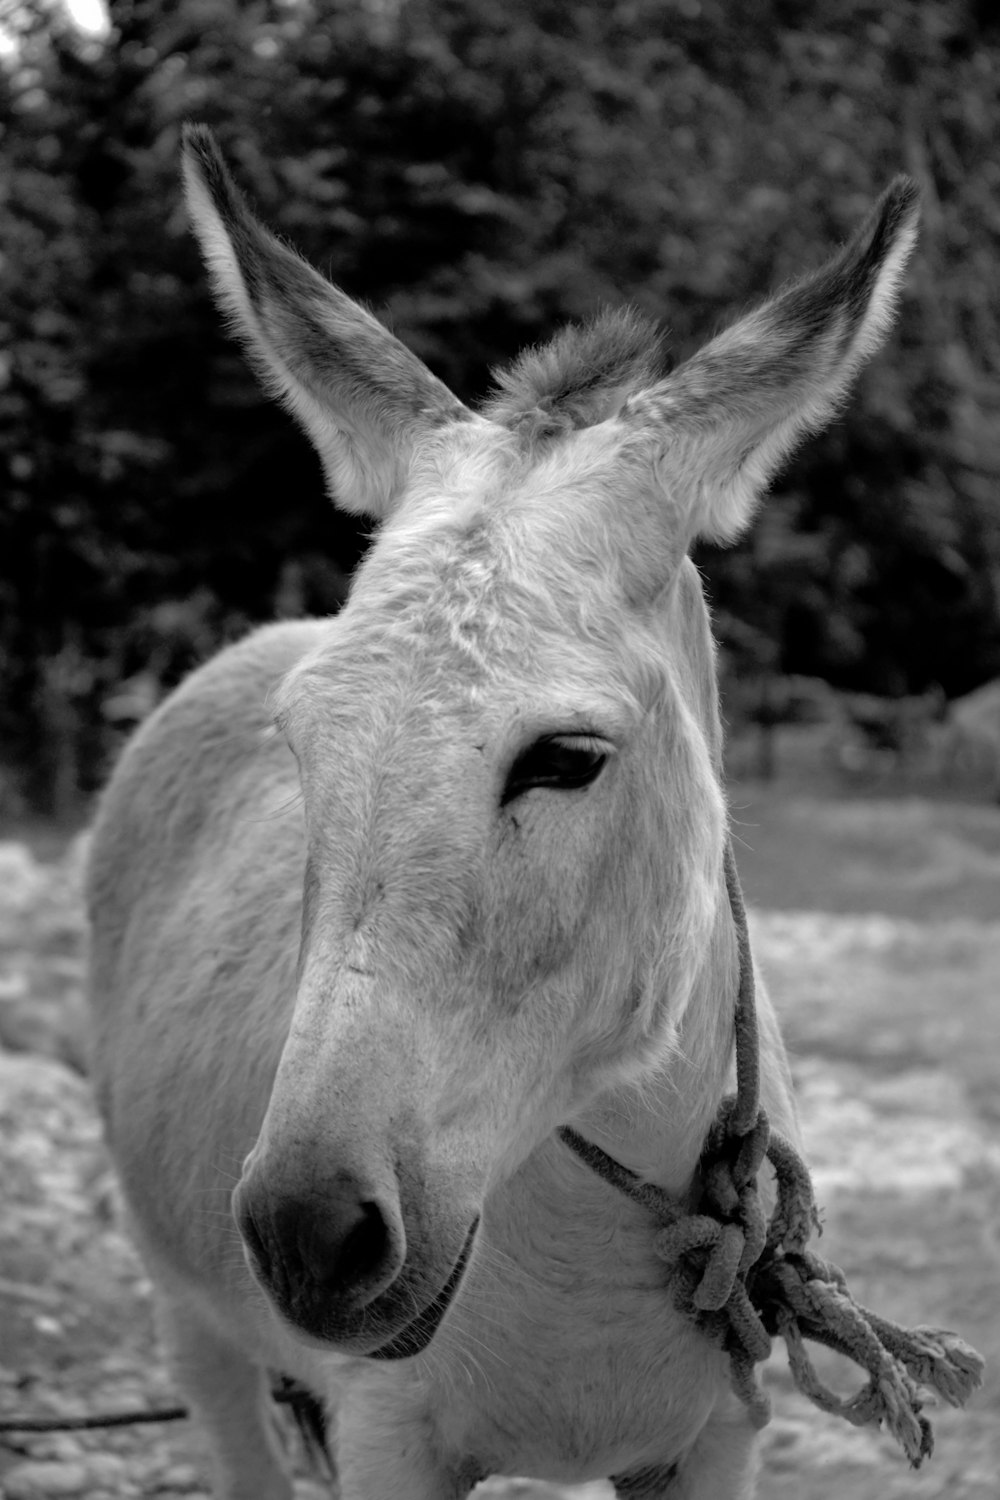 a close up of a donkey with a rope around its neck